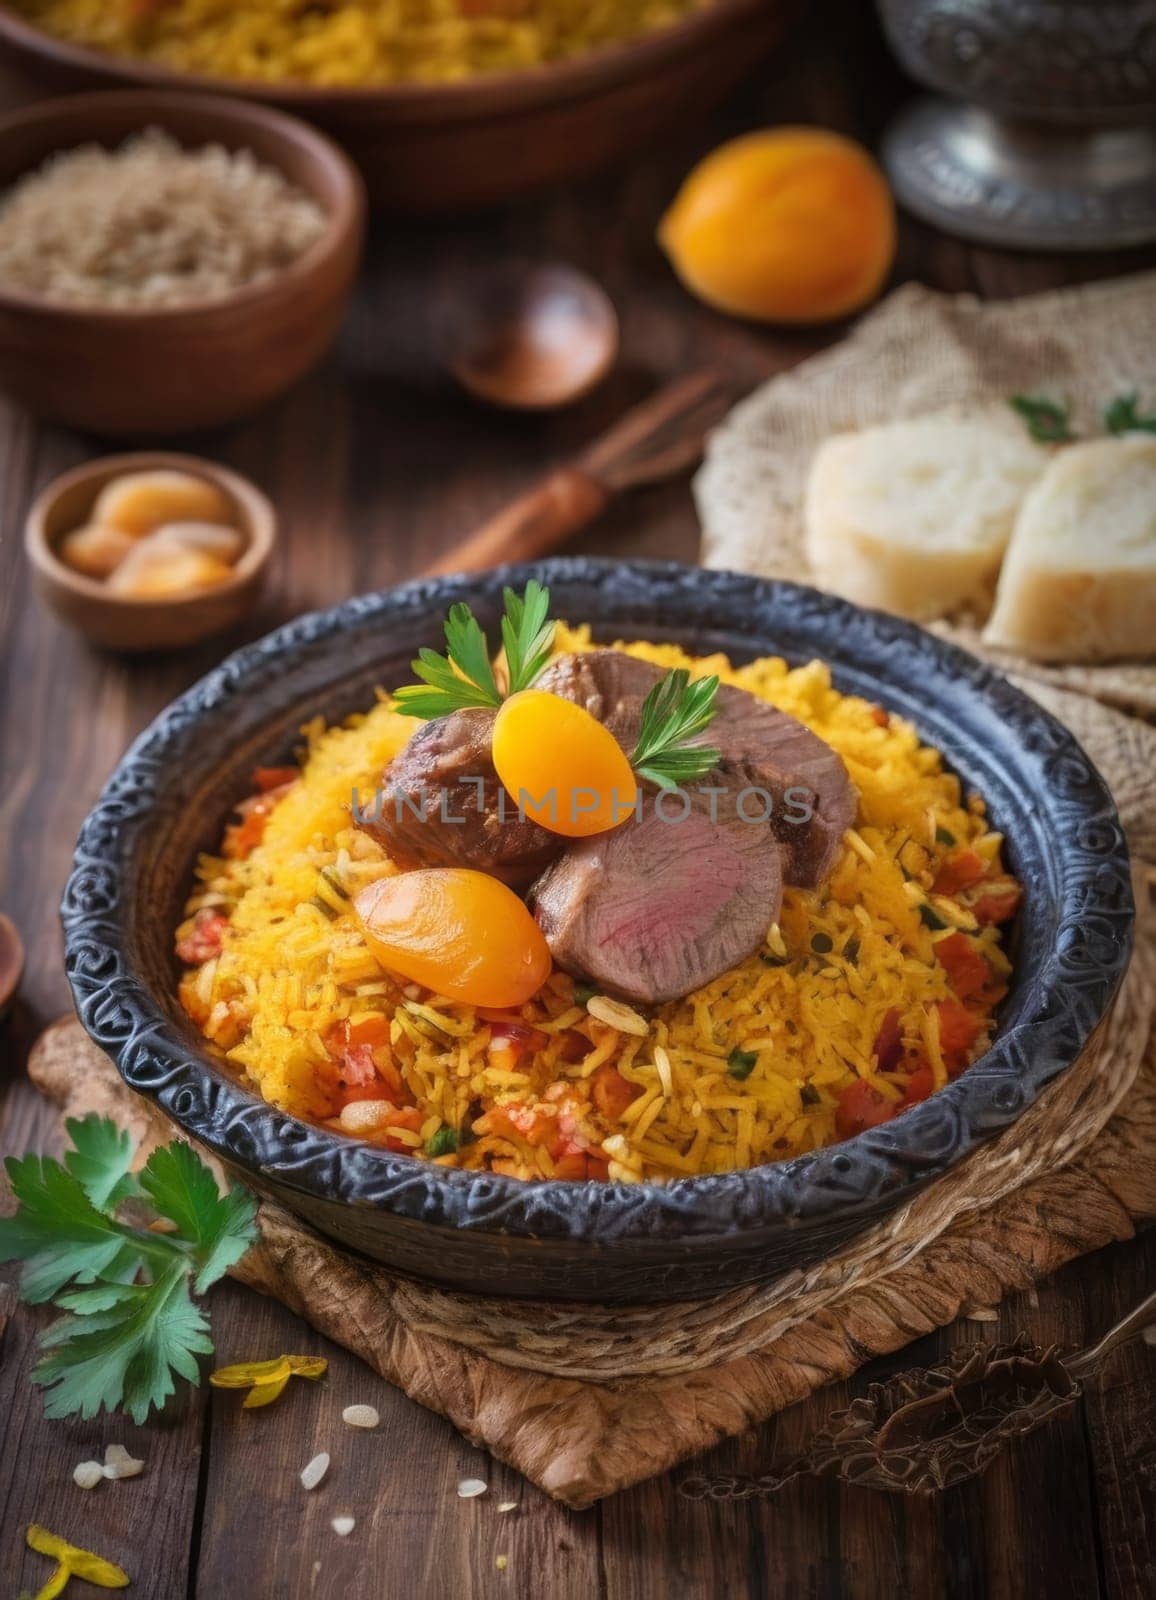 Azerbaijani plov in an ornate dish, rice pilaf with saffron, apricots, and lamb. A traditional Azerbaijani dish known for its rich flavors and aromatic rice